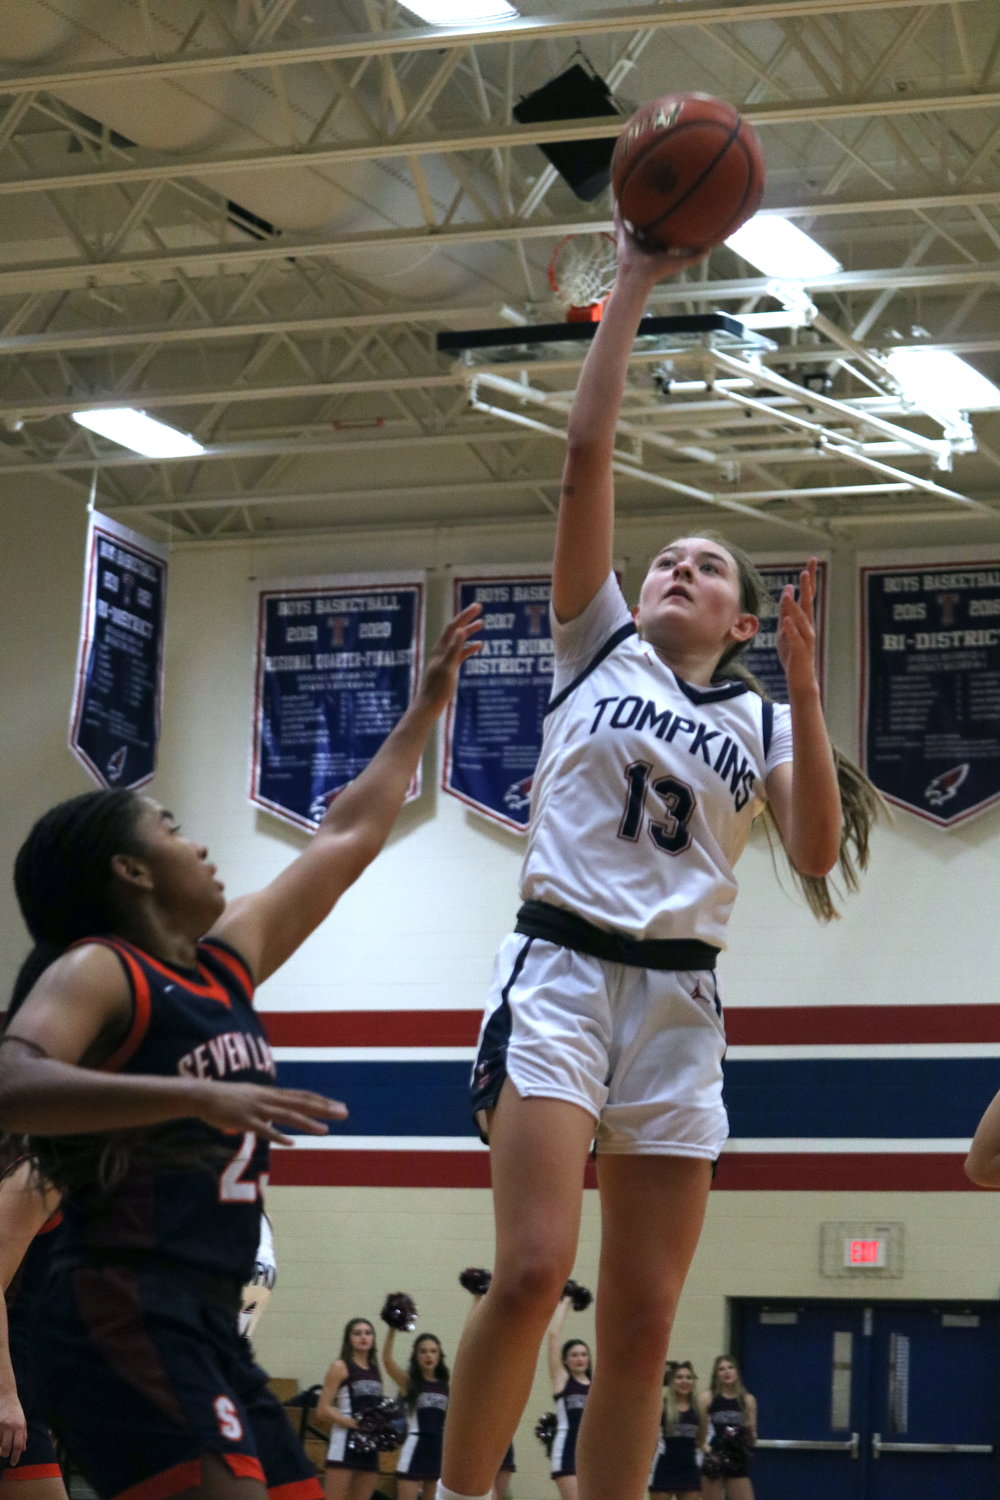 Macy Spencer shoots a floater during Tuesday’s District 19-6A game between Tompkins and Seven Lakes at the Tompkins gym.